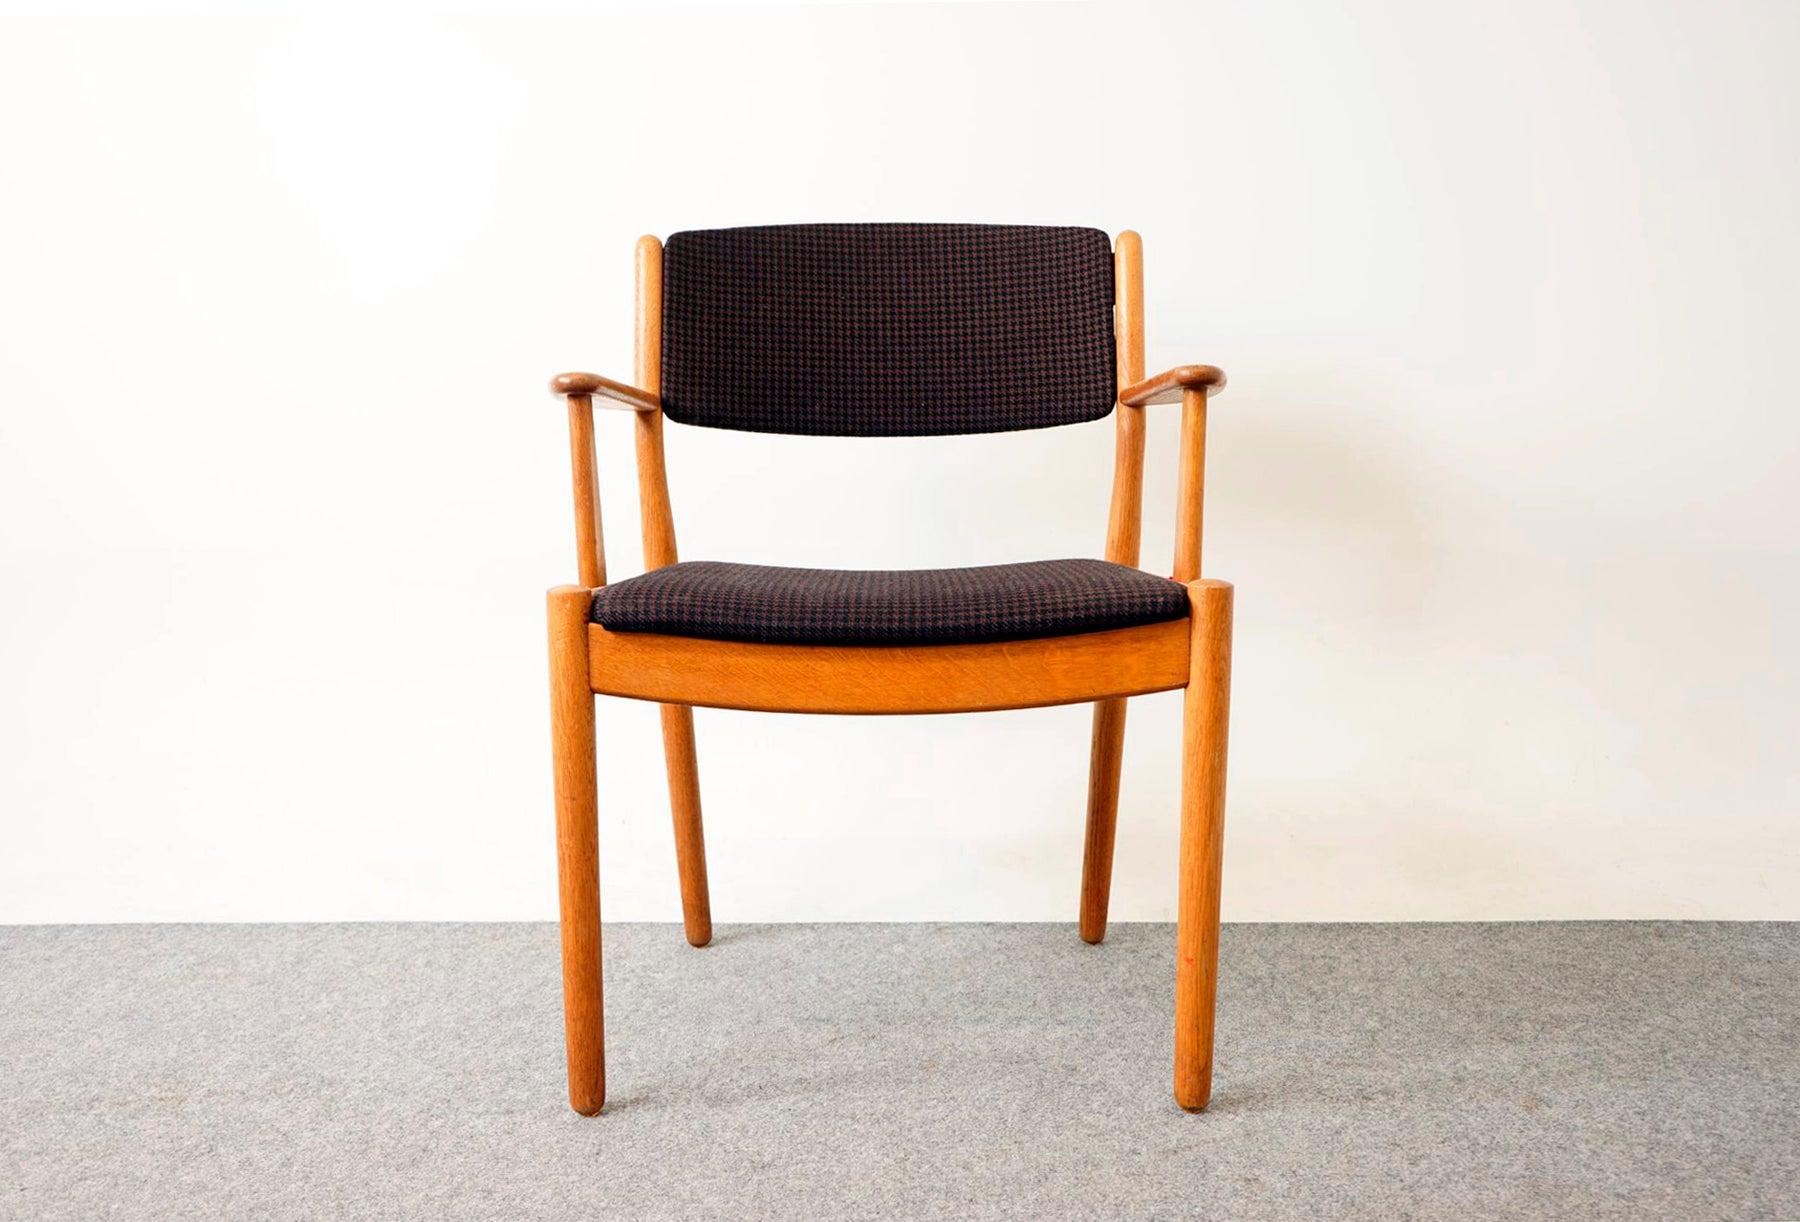 Oak mid-century arm chair, circa 1960's. Sturdy solid wood frame is wonderfully scaled for your many seating needs around the urban home. Upright upholstered back provides support and comfort. Clean modern design makes it easy to combine with other